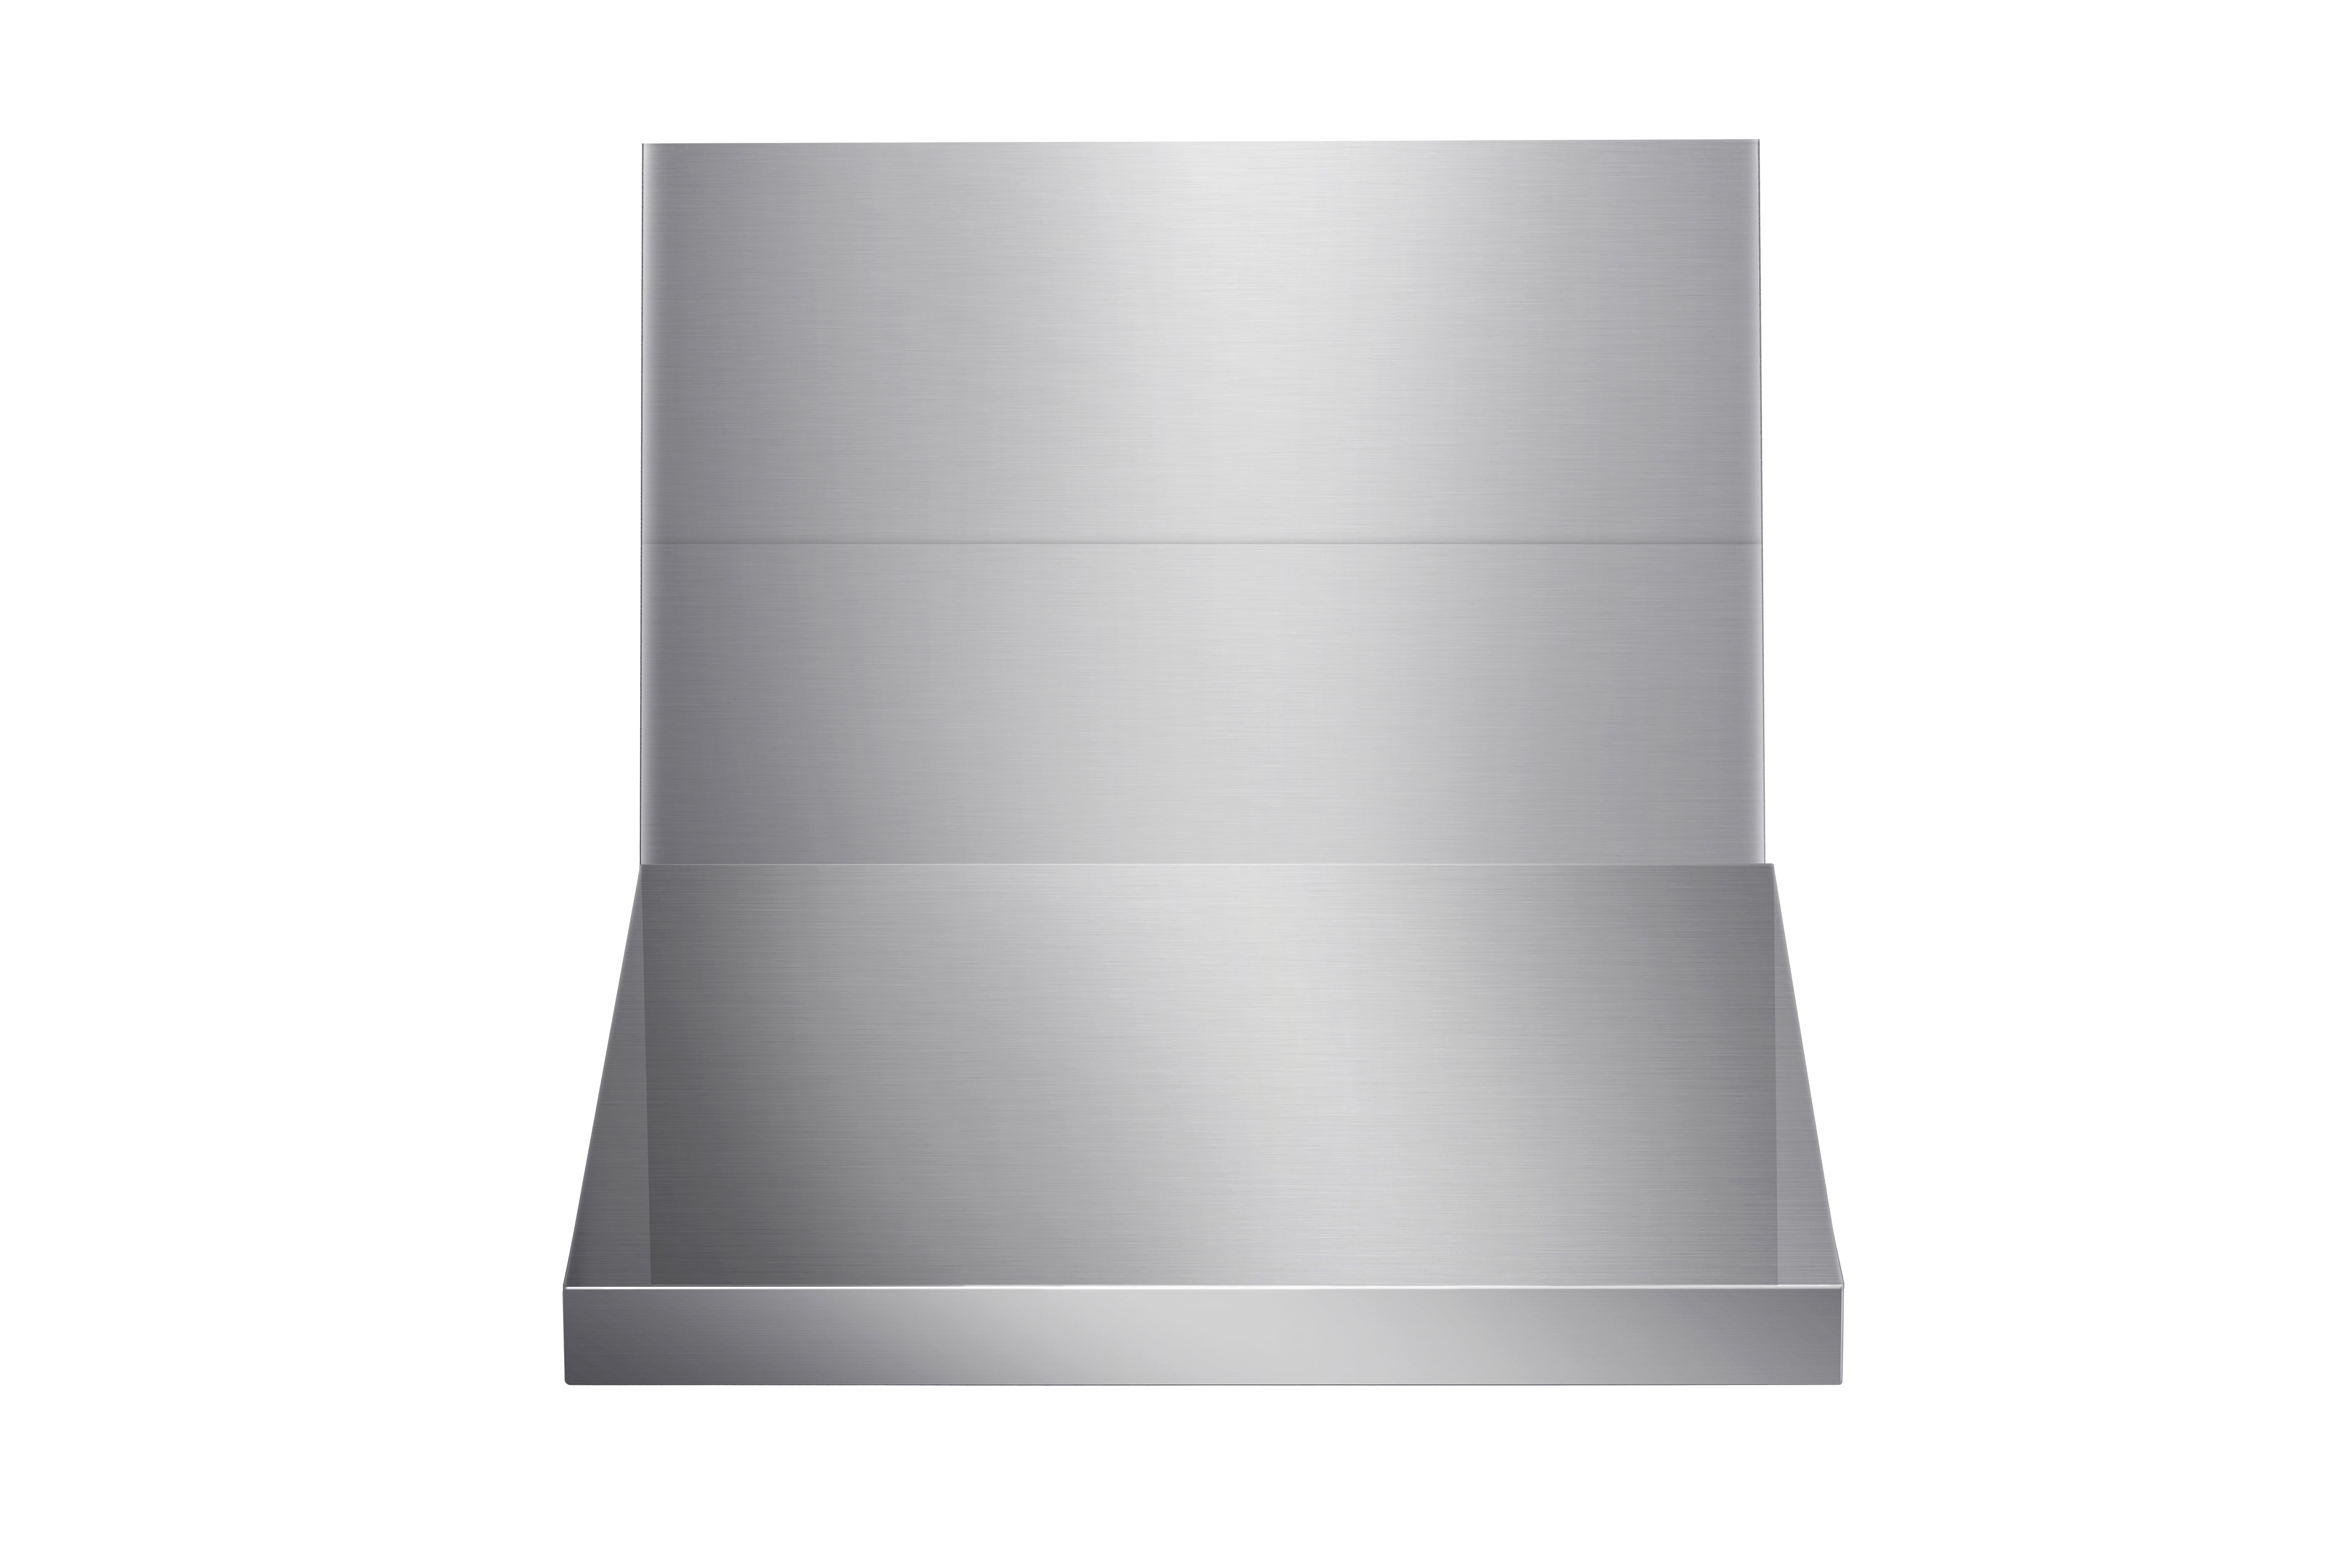 Thor Kitchen 36 Inch Professional Range Hood, 11 Inches Tall in Stainless Steel- Model TRH3606